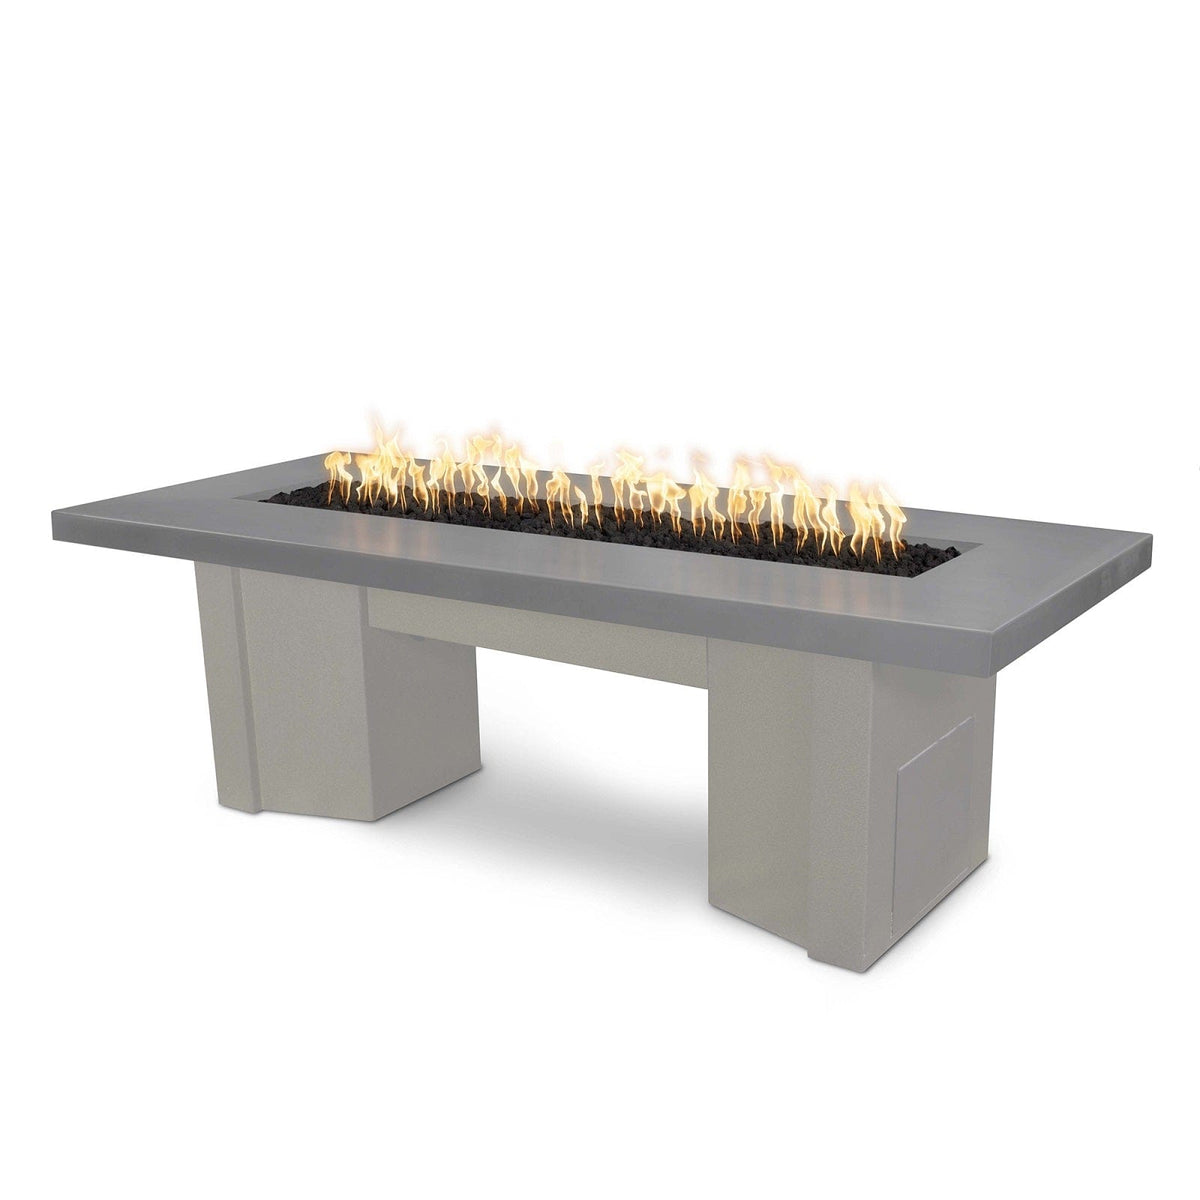 The Outdoor Plus Fire Features Natural Gray (-NGY) / Pewter Powder Coated Steel (-PEW) The Outdoor Plus 60&quot; Alameda Fire Table Smooth Concrete in Liquid Propane - 12V Electronic Ignition / OPT-ALMGFRC60E12V-LP